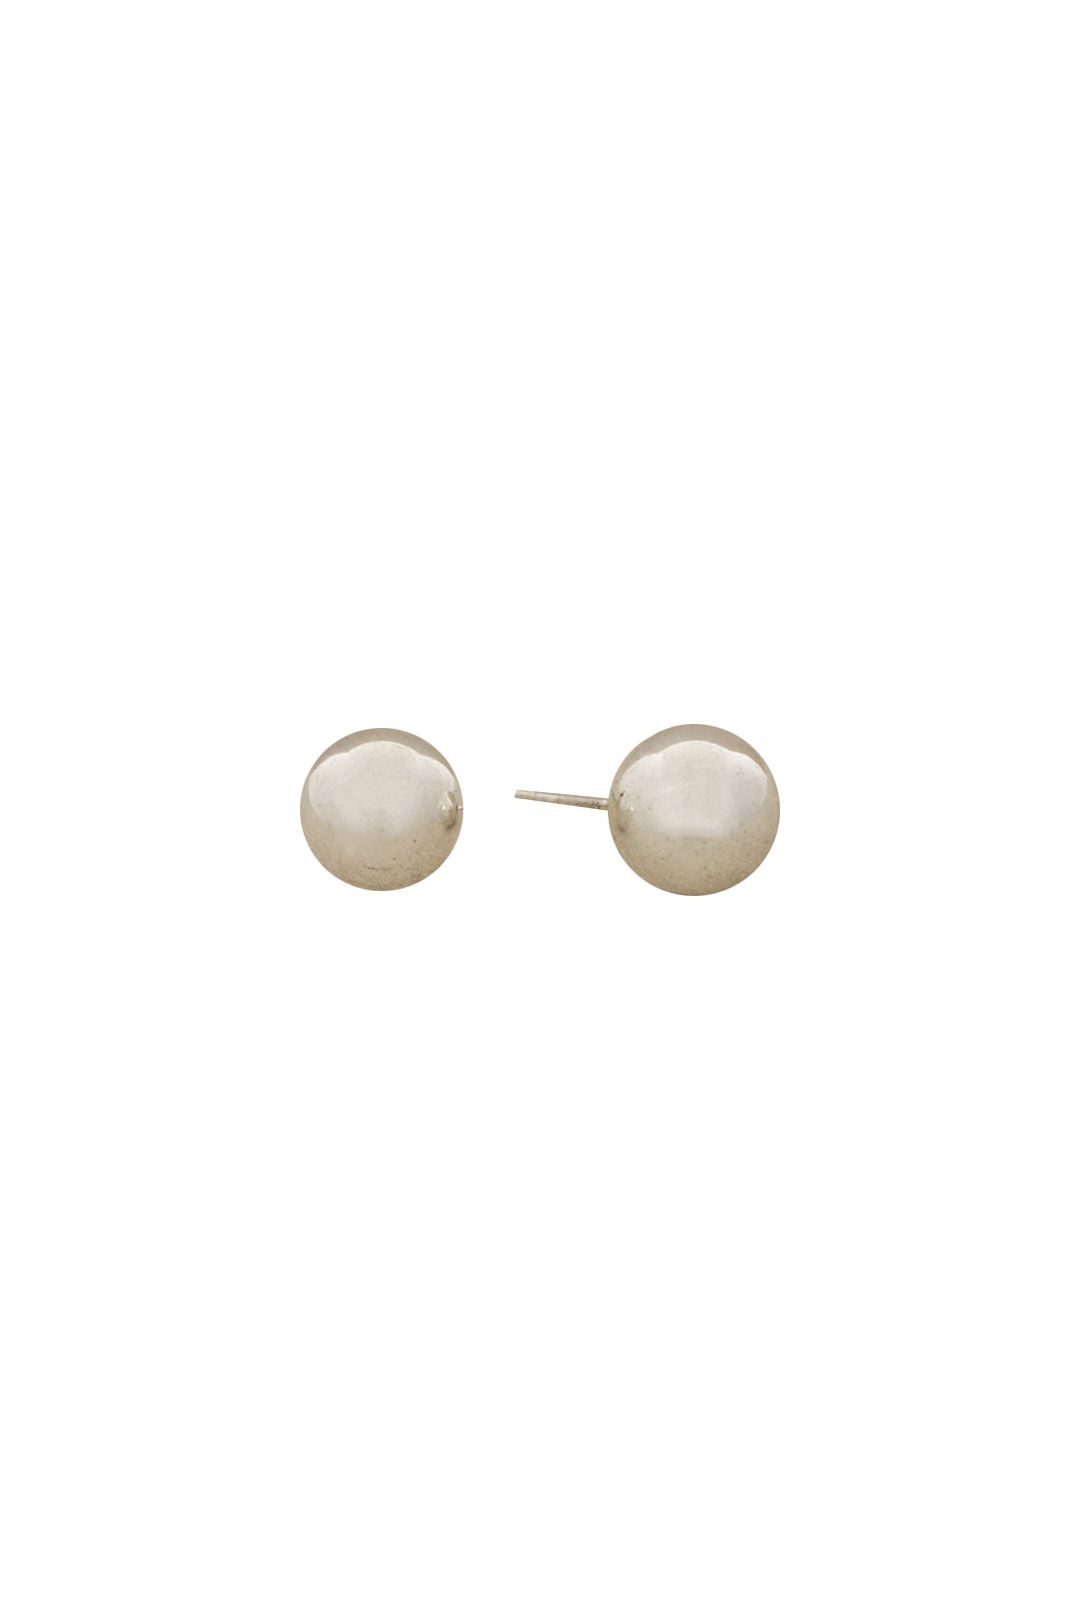 Adorne - 10mm Metal Ball Stud Earring - Front